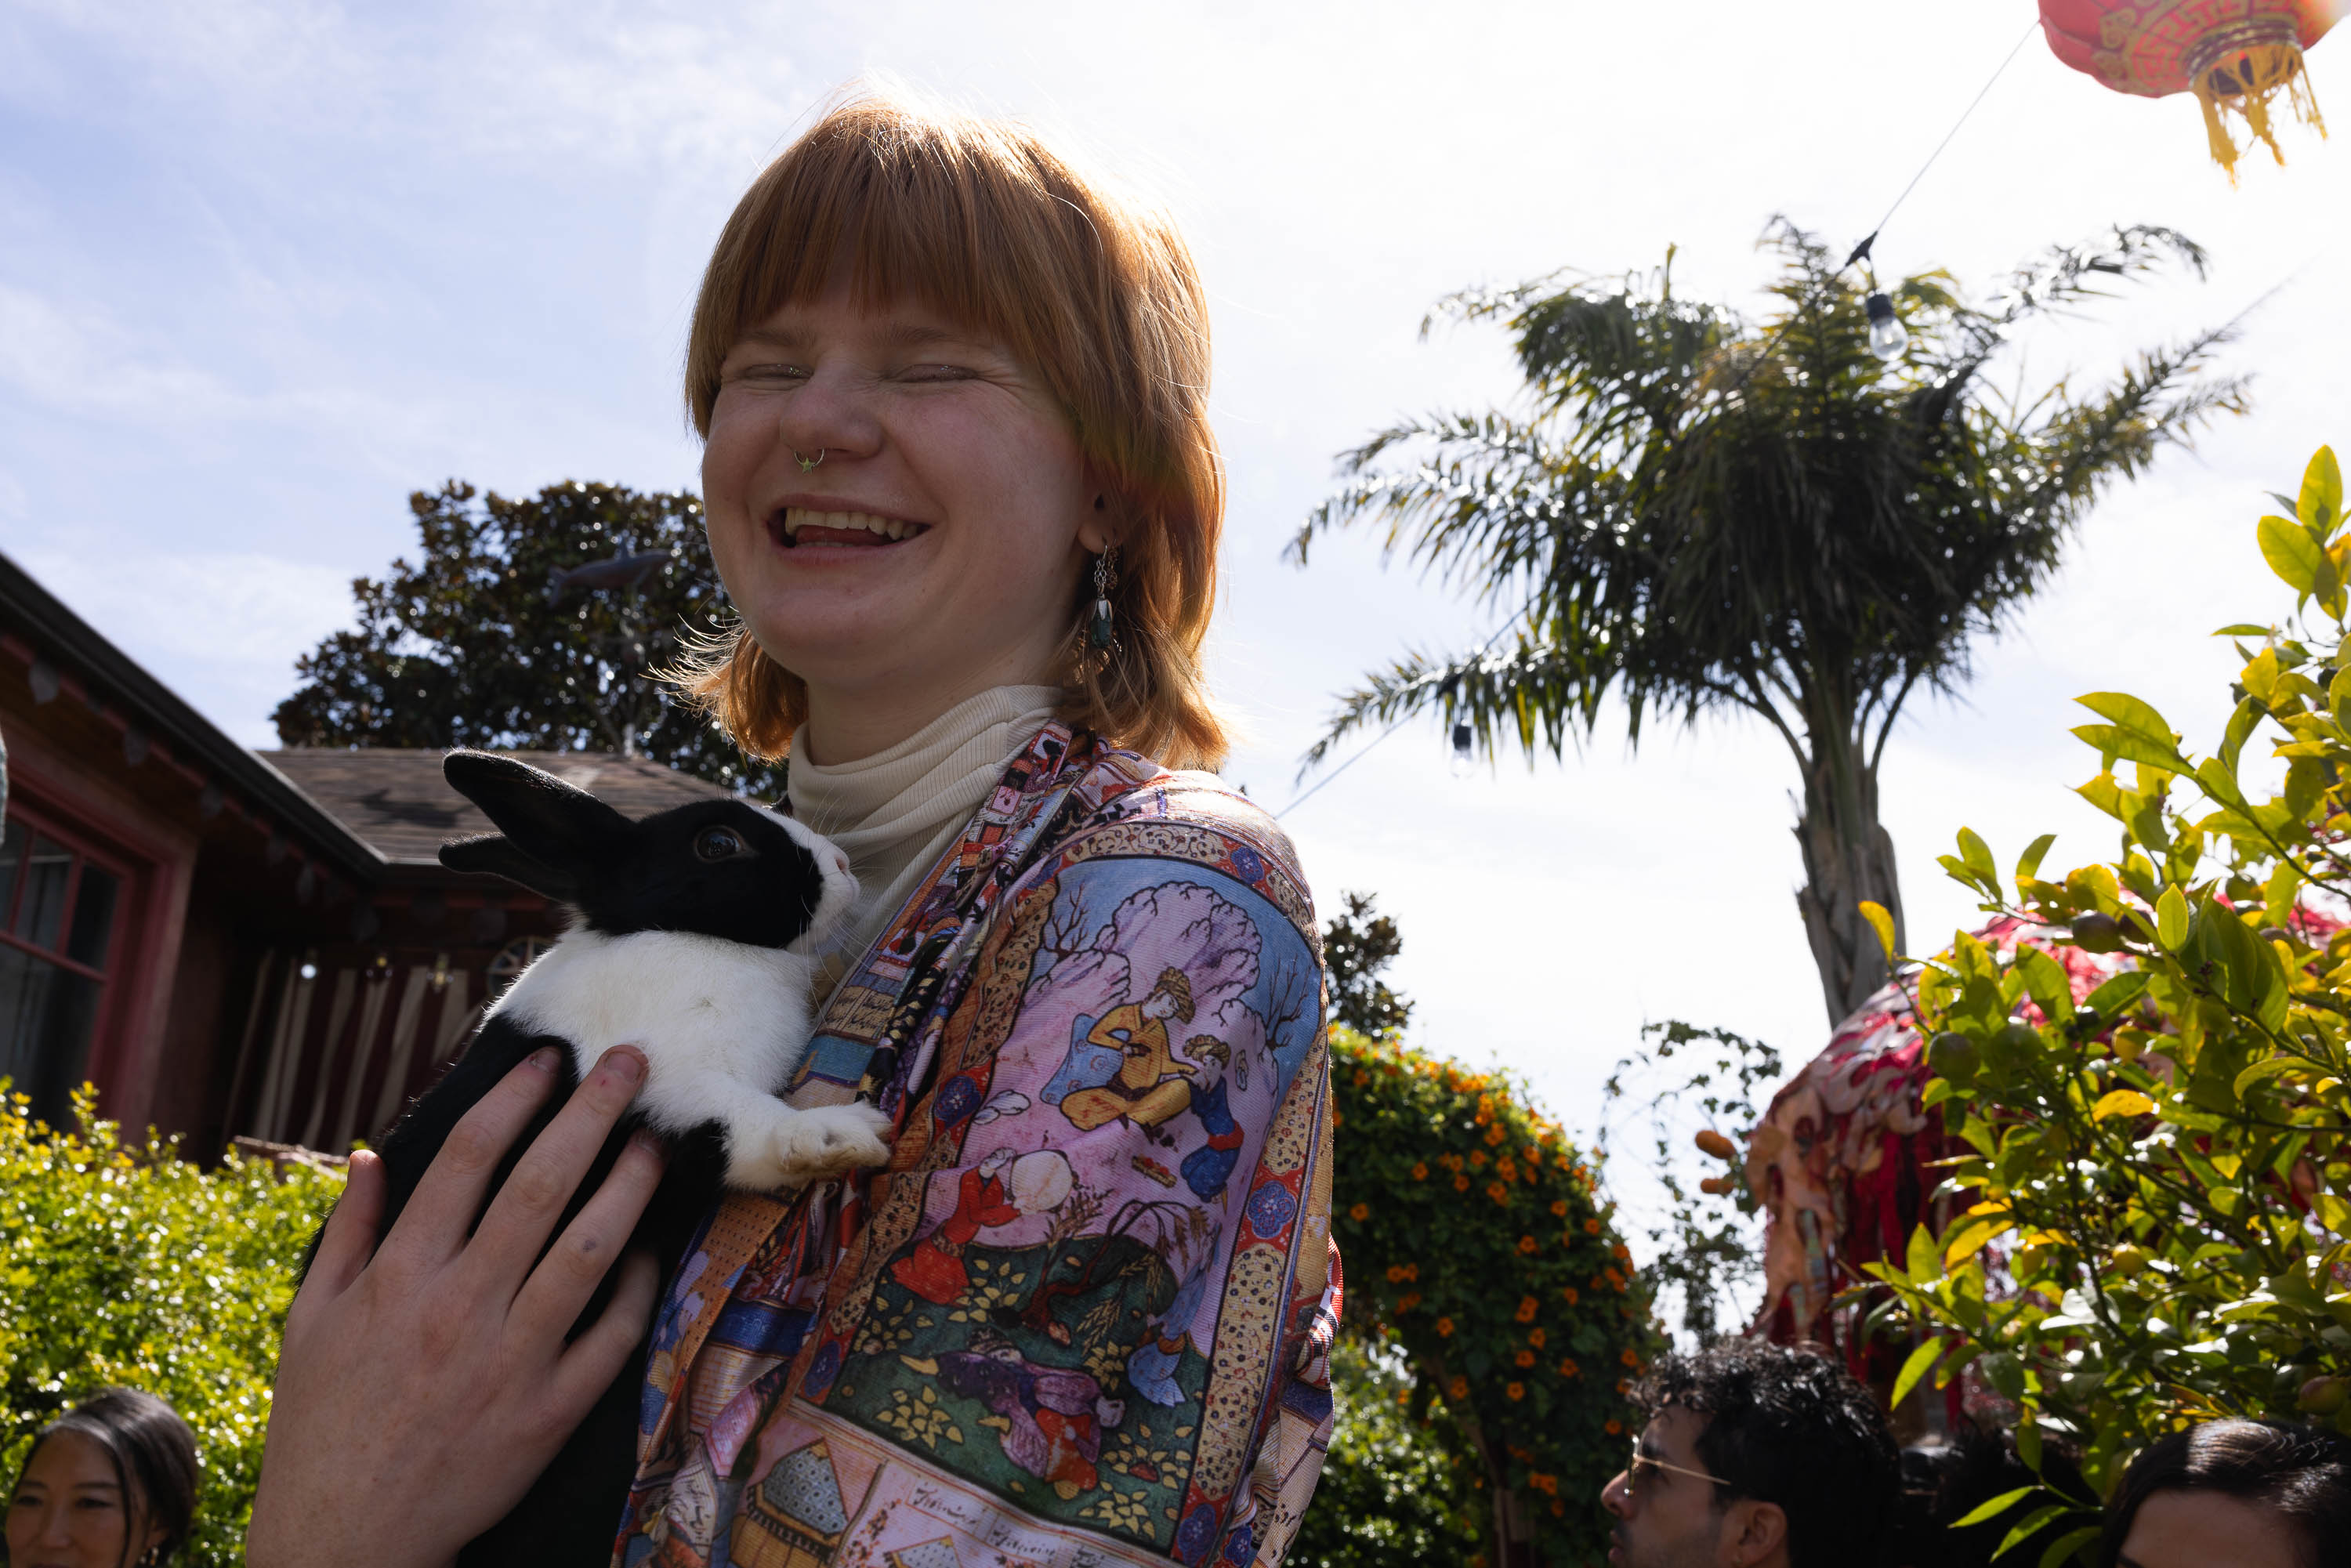 A person with a warm smile holding a black and white rabbit outdoors in sunlight.